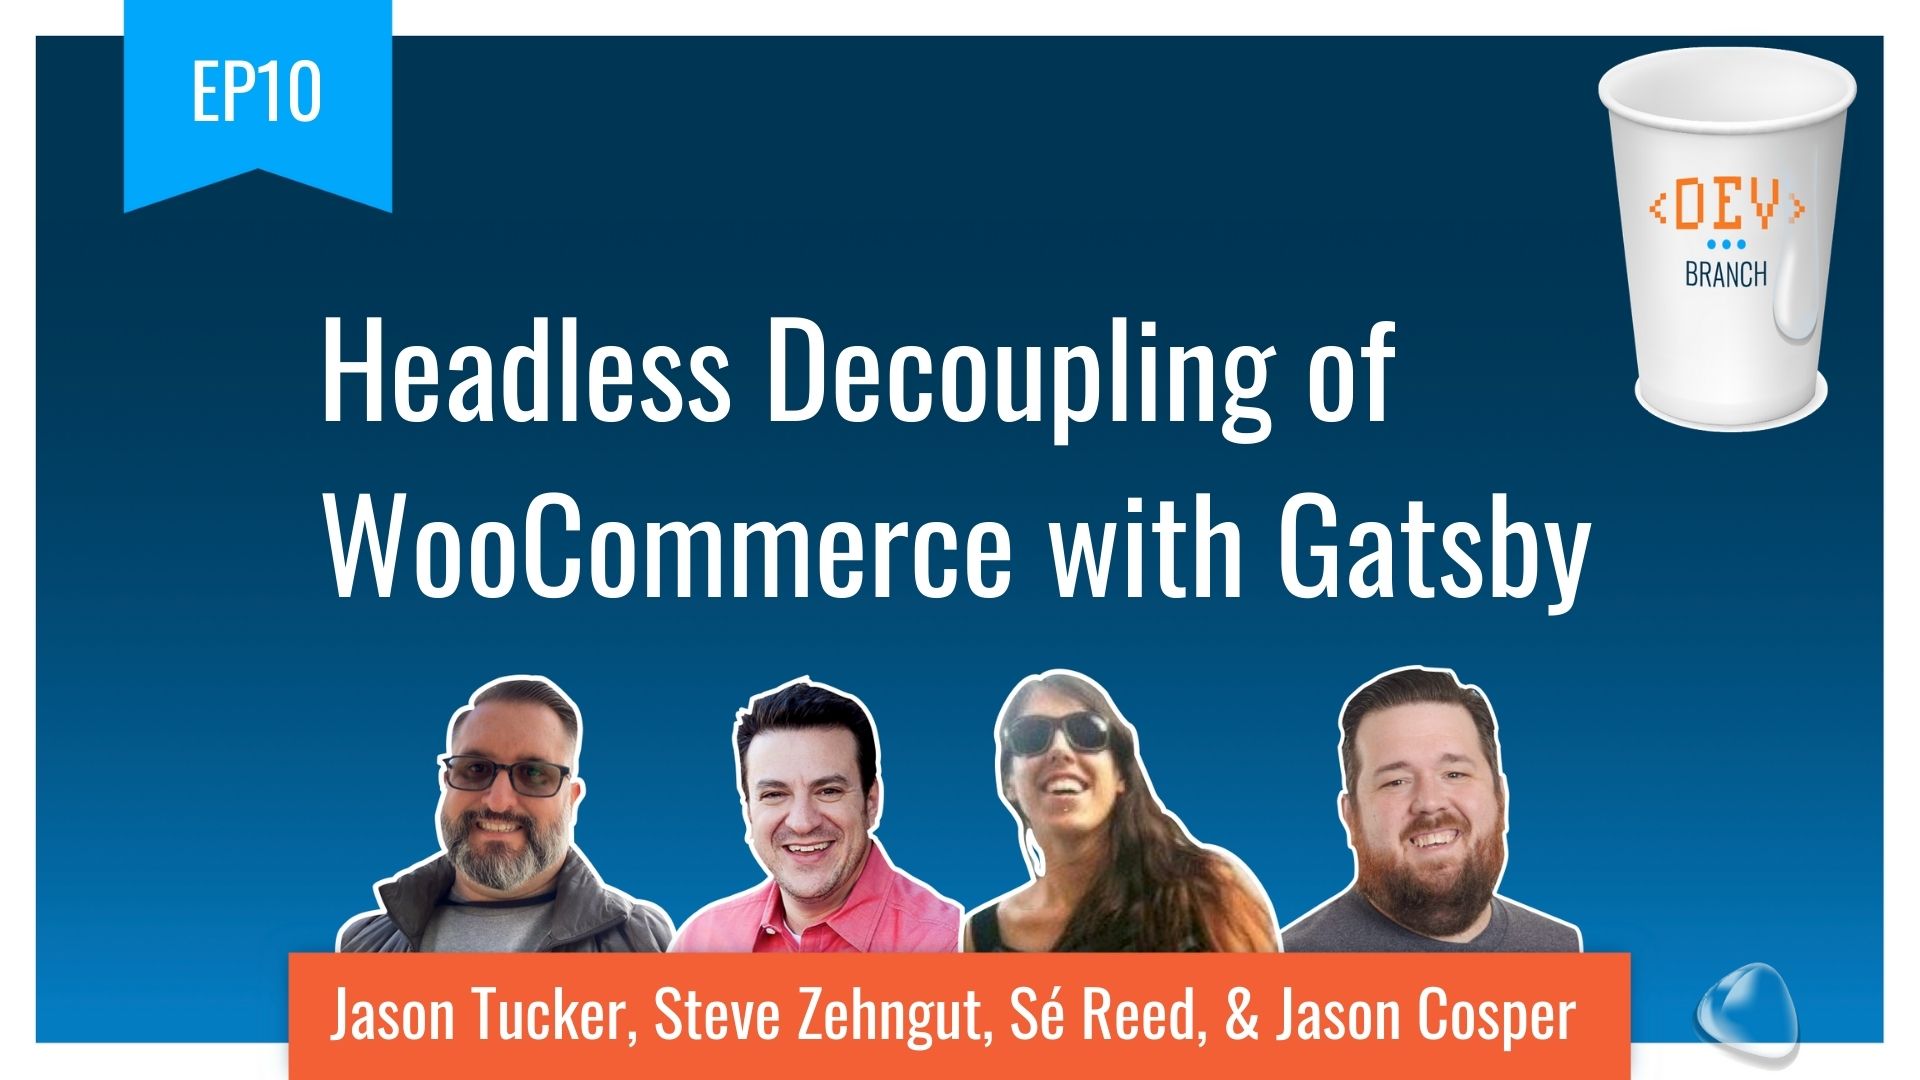 EP10 - Headless Decoupling of WooCommerce with Gatsby